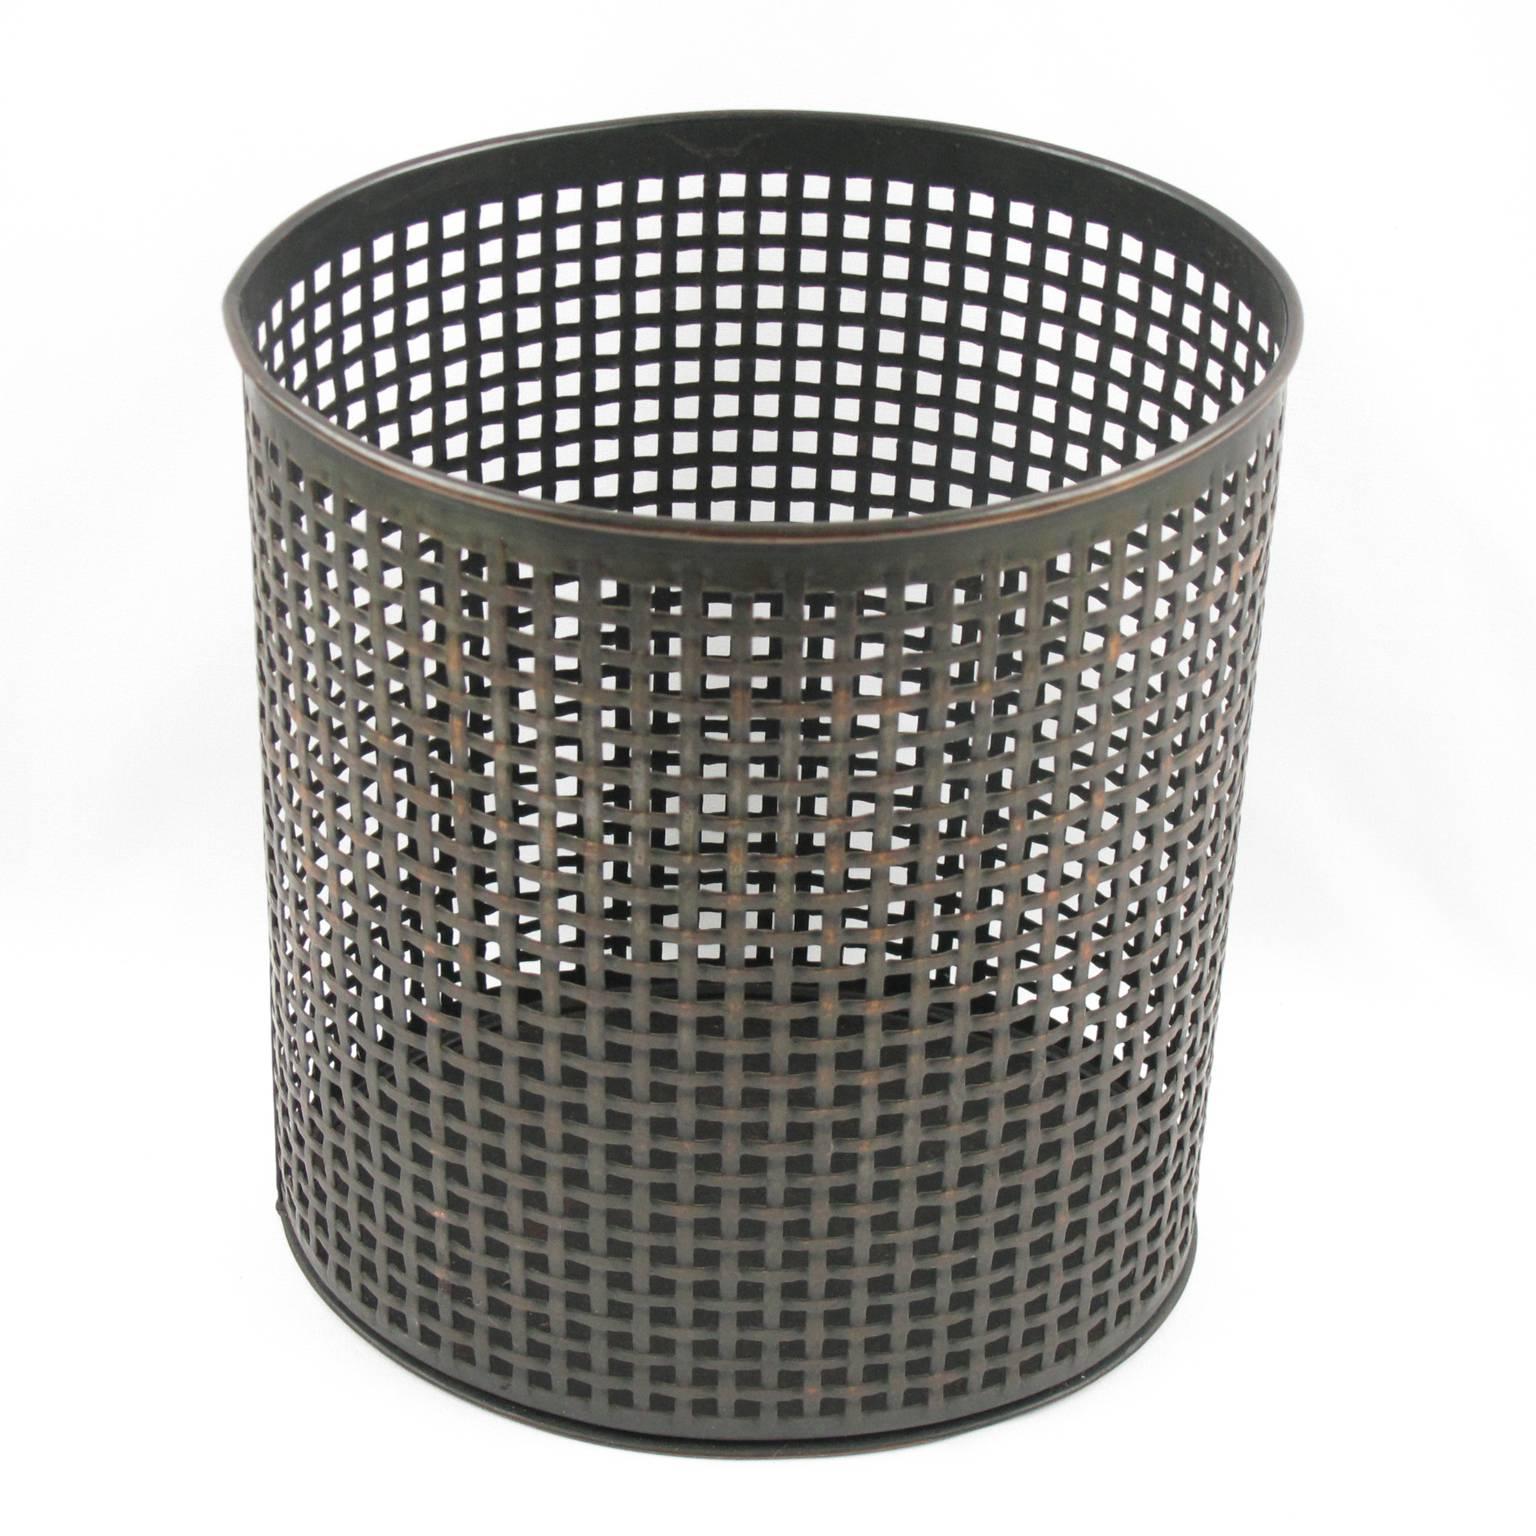 Mid-Century Modern Perforated Metal Industrial Waste Basket in the Manner of Mathieu Mategot, 1950s